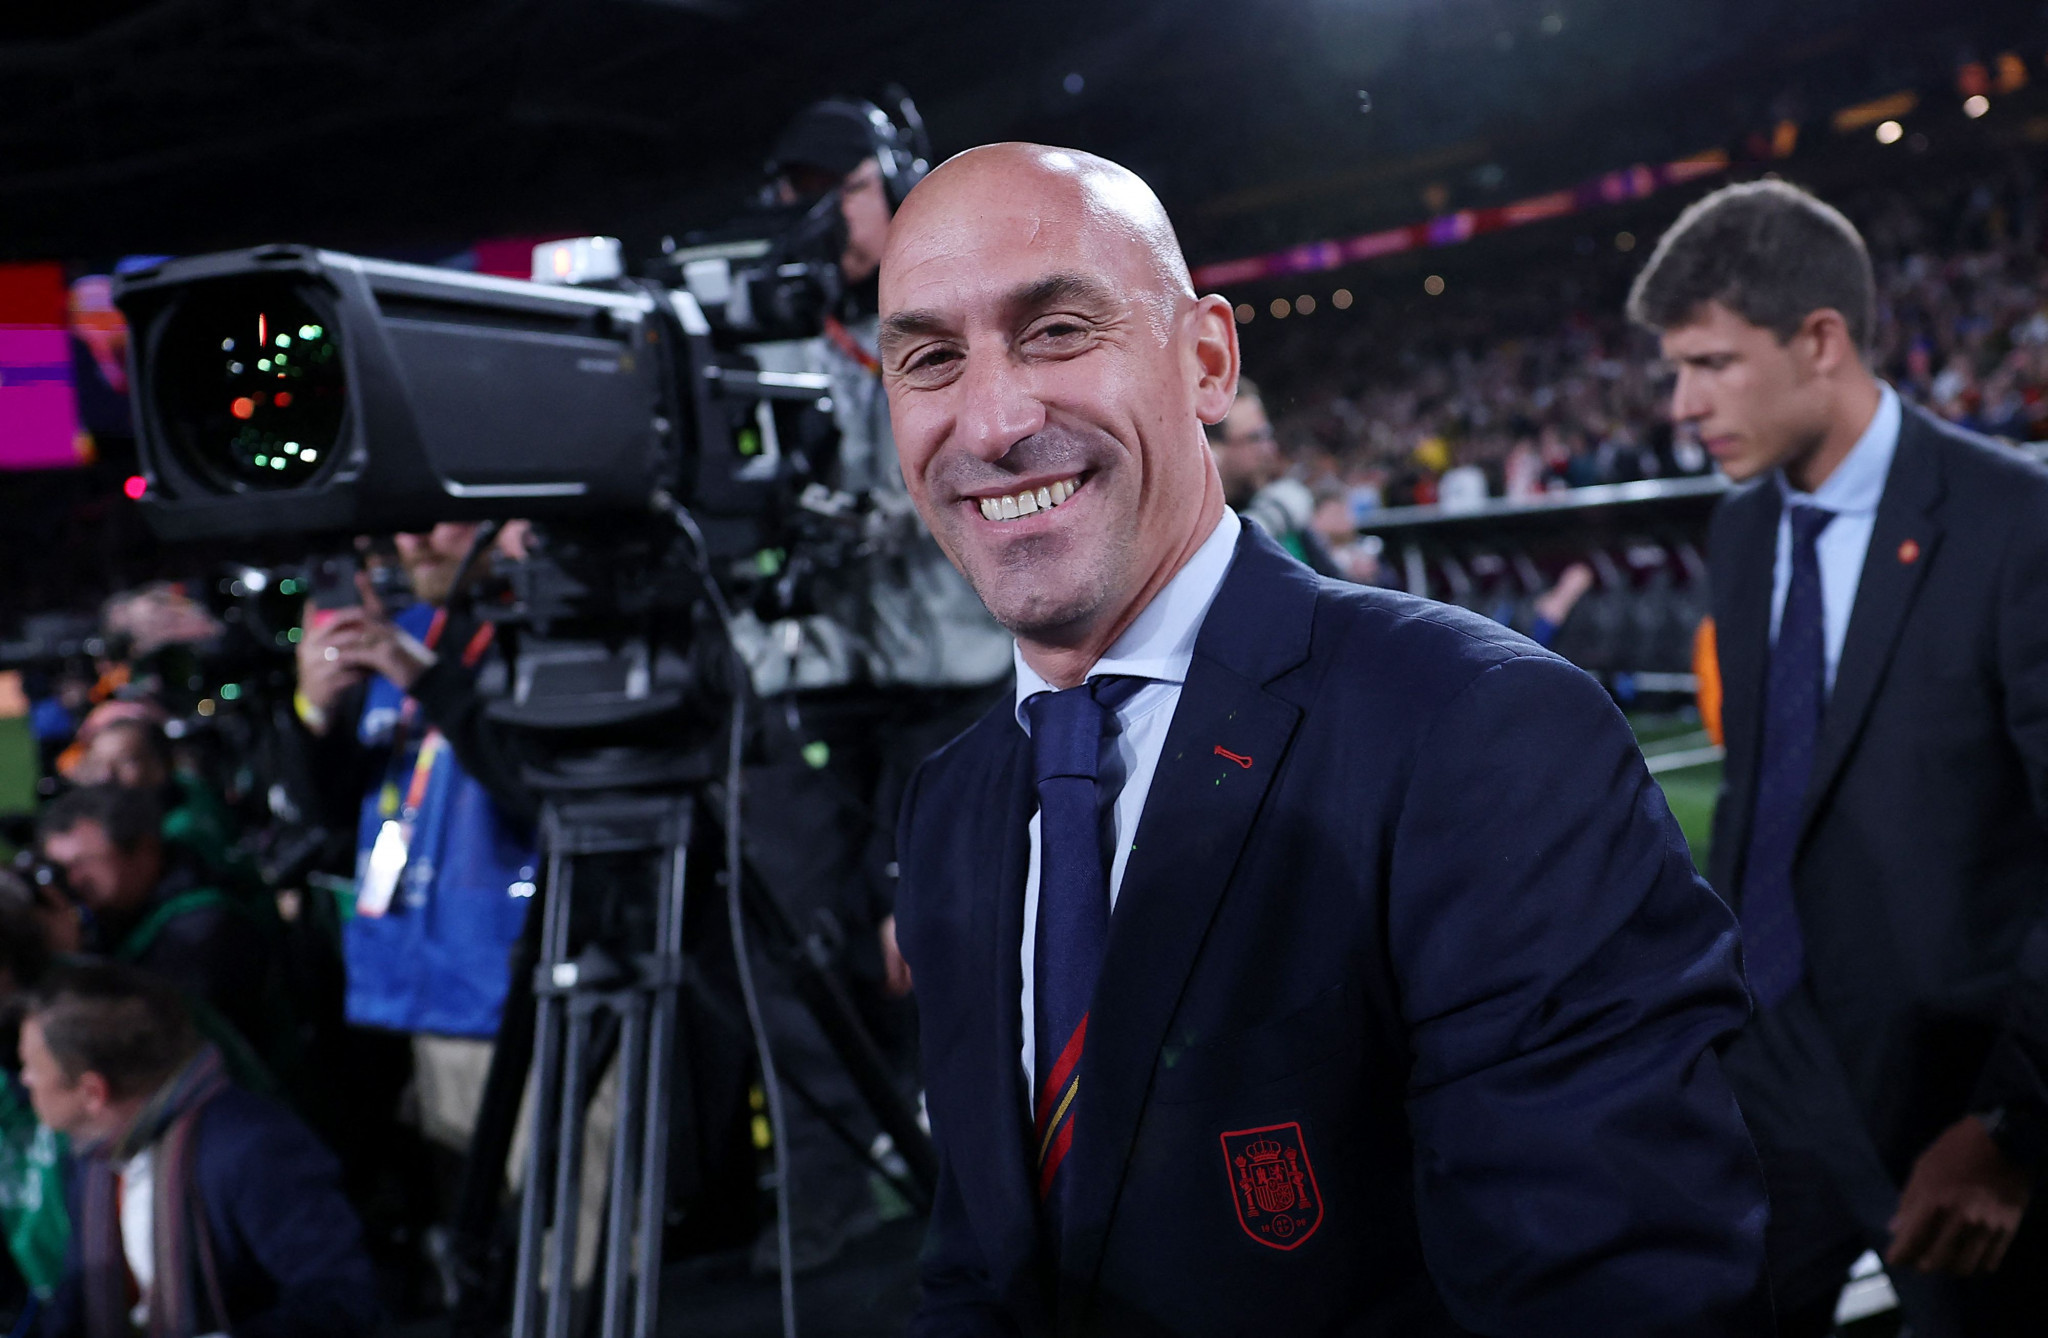 Luis Rubiales has announced his resignation as Royal Spanish Football Federation President ©Getty Images